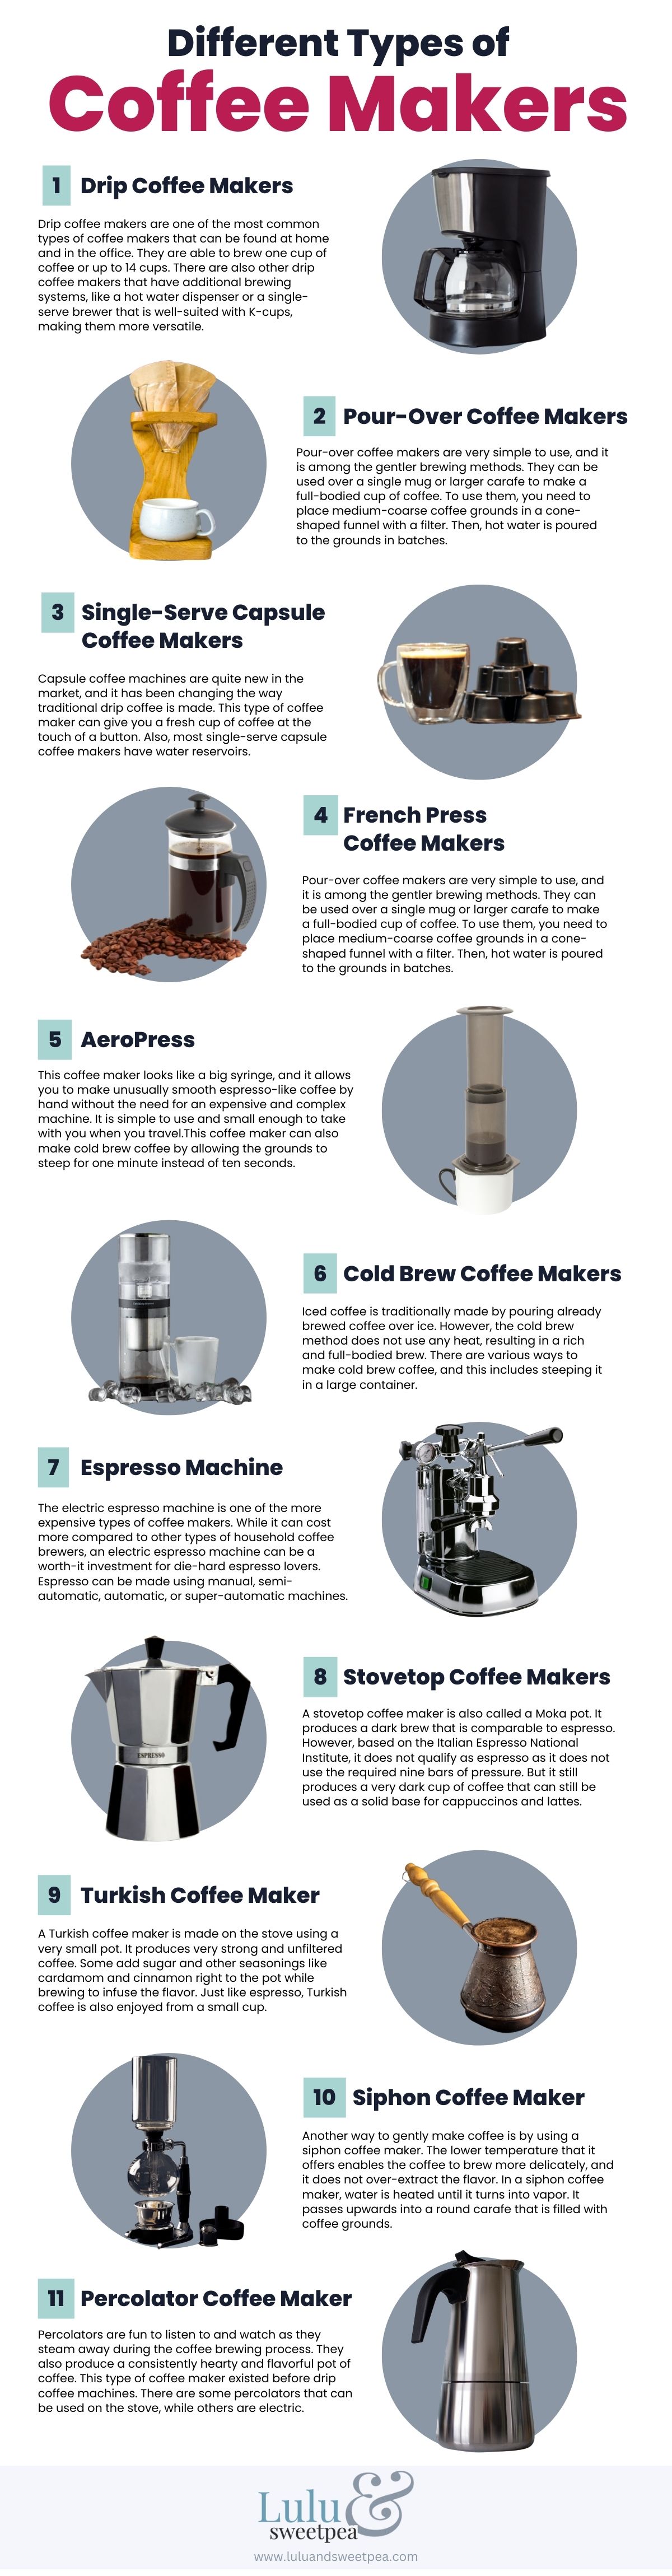  Picking the Right Coffee Maker